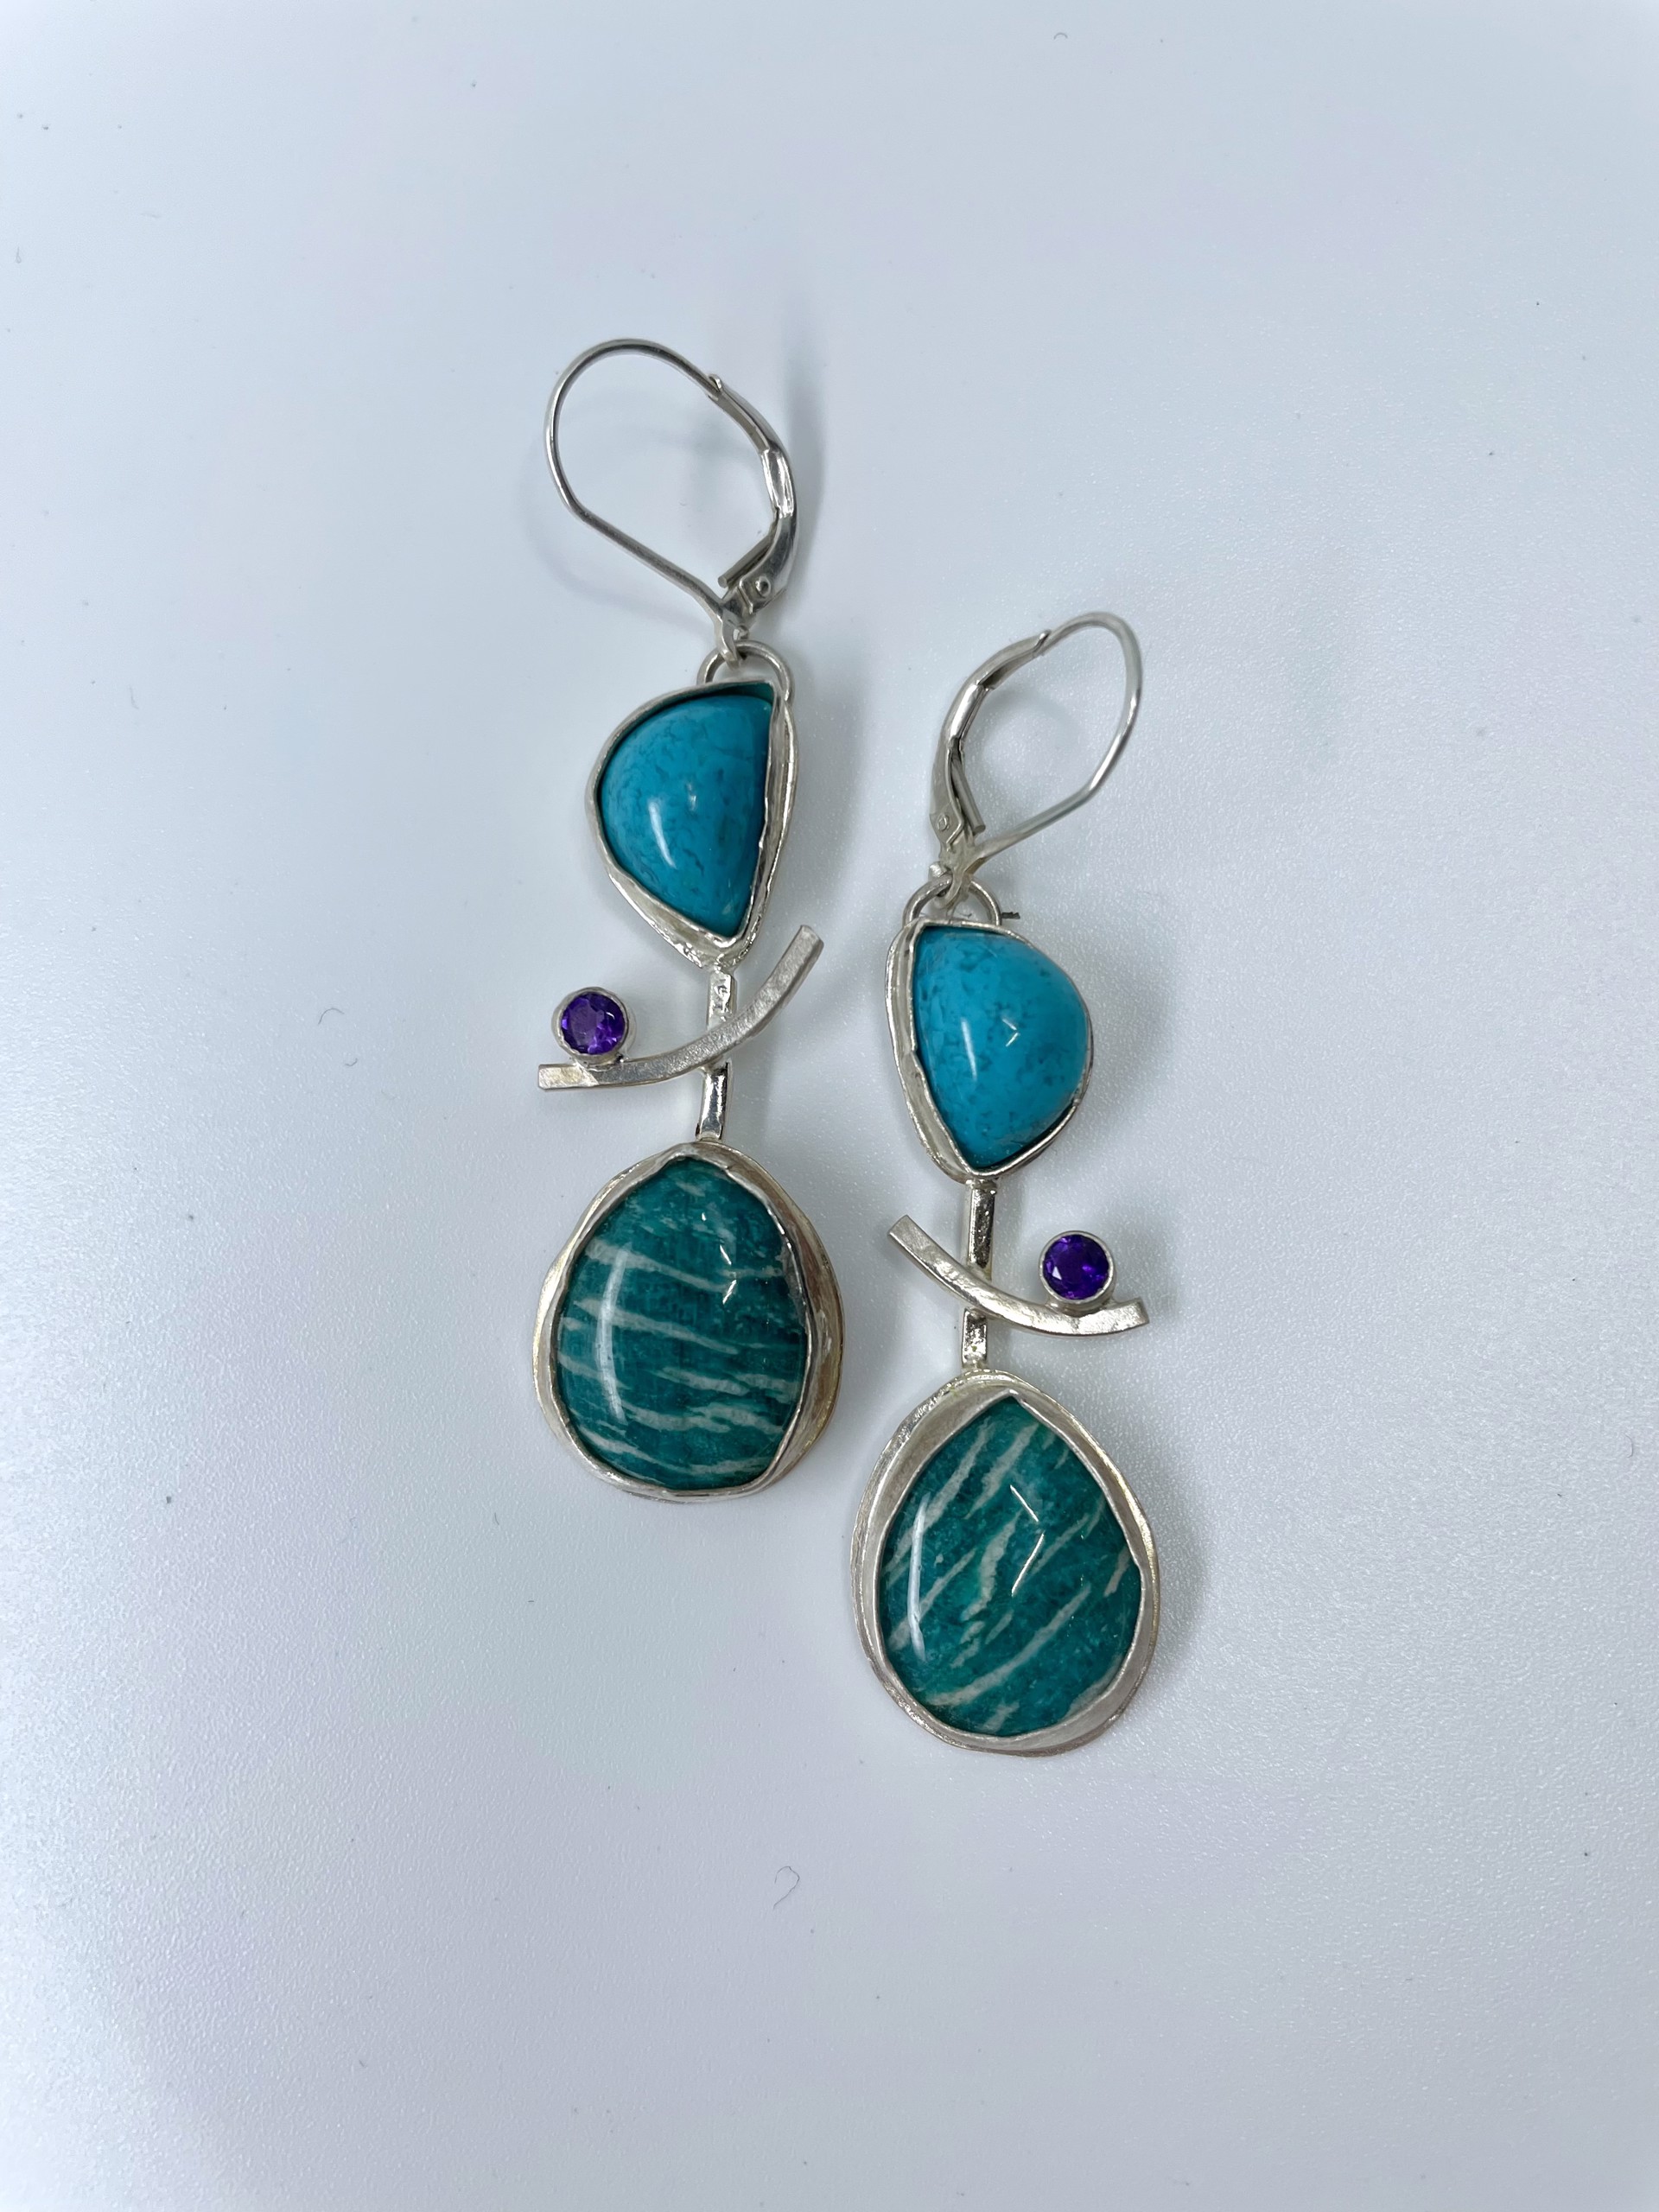 1211 Striped Amazonite, Amazonite with a small Amethyst Earrings by Suzanne Brown